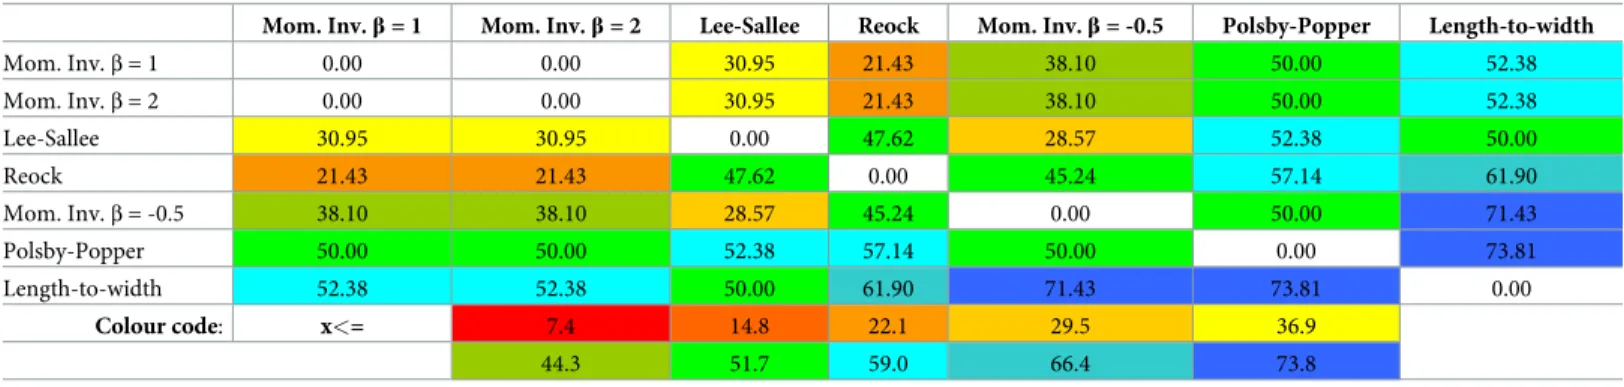 Table 6. The relative heat map shows the distances between solutions measured in SRD score, when the reference is set one-by-one as one of the solutions.